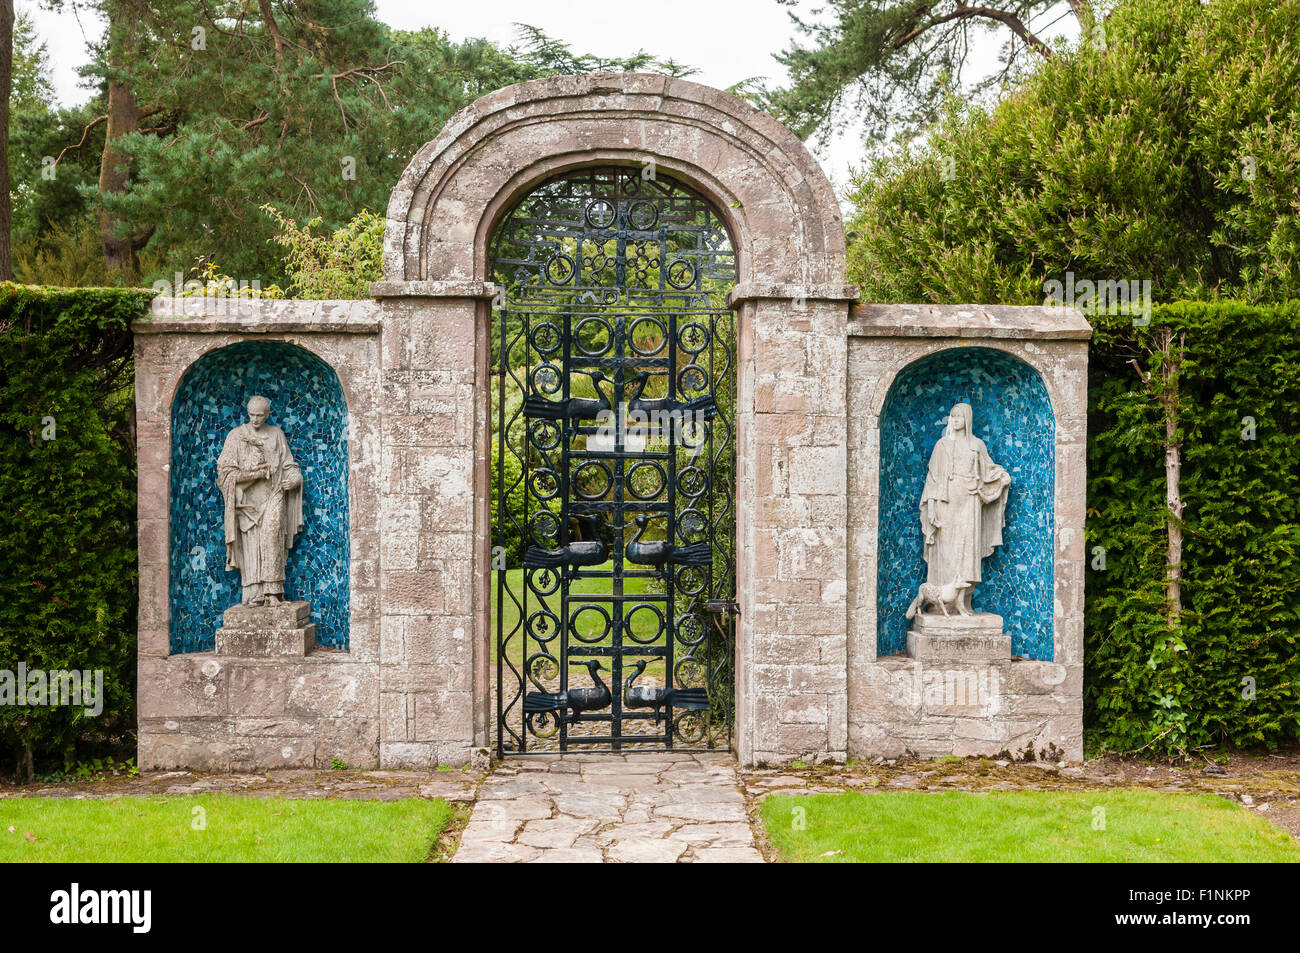 Two statues on either side of a steel gate and stone archway in a formal garden Stock Photo